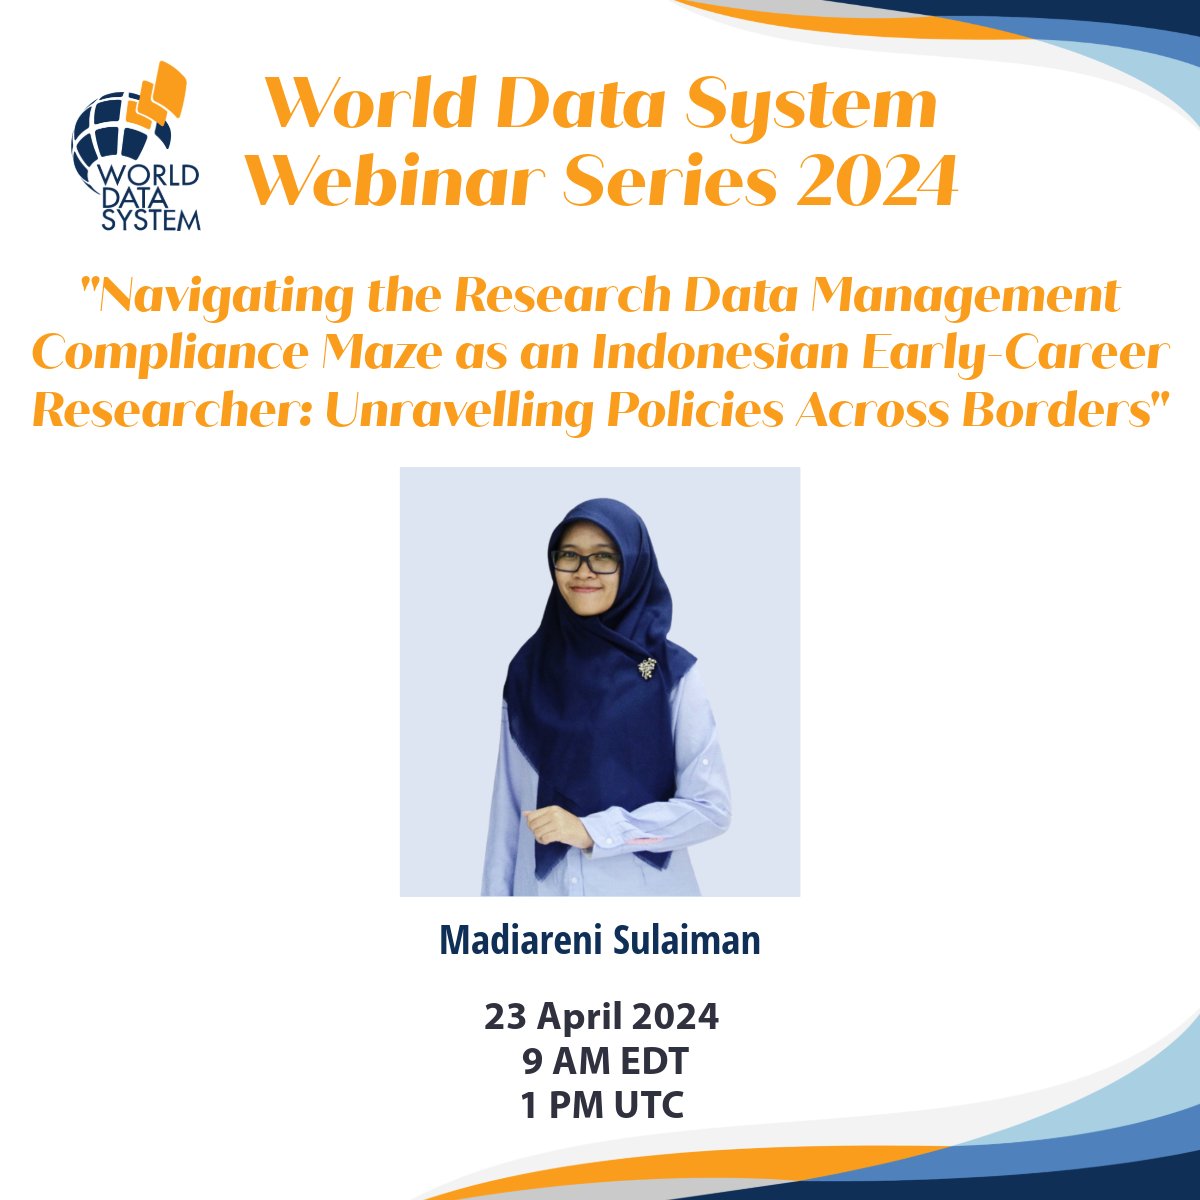 🌐Upcoming Webinar: Have you signed up for the upcoming WDS webinar yet? Join Madiareni Sulaiman @renies on 23 April at 1 pm UTC as she shares her experience with RDM compliance from the early career researcher perspective. Sign up here ➡️ worlddatasystem.org/webinars/